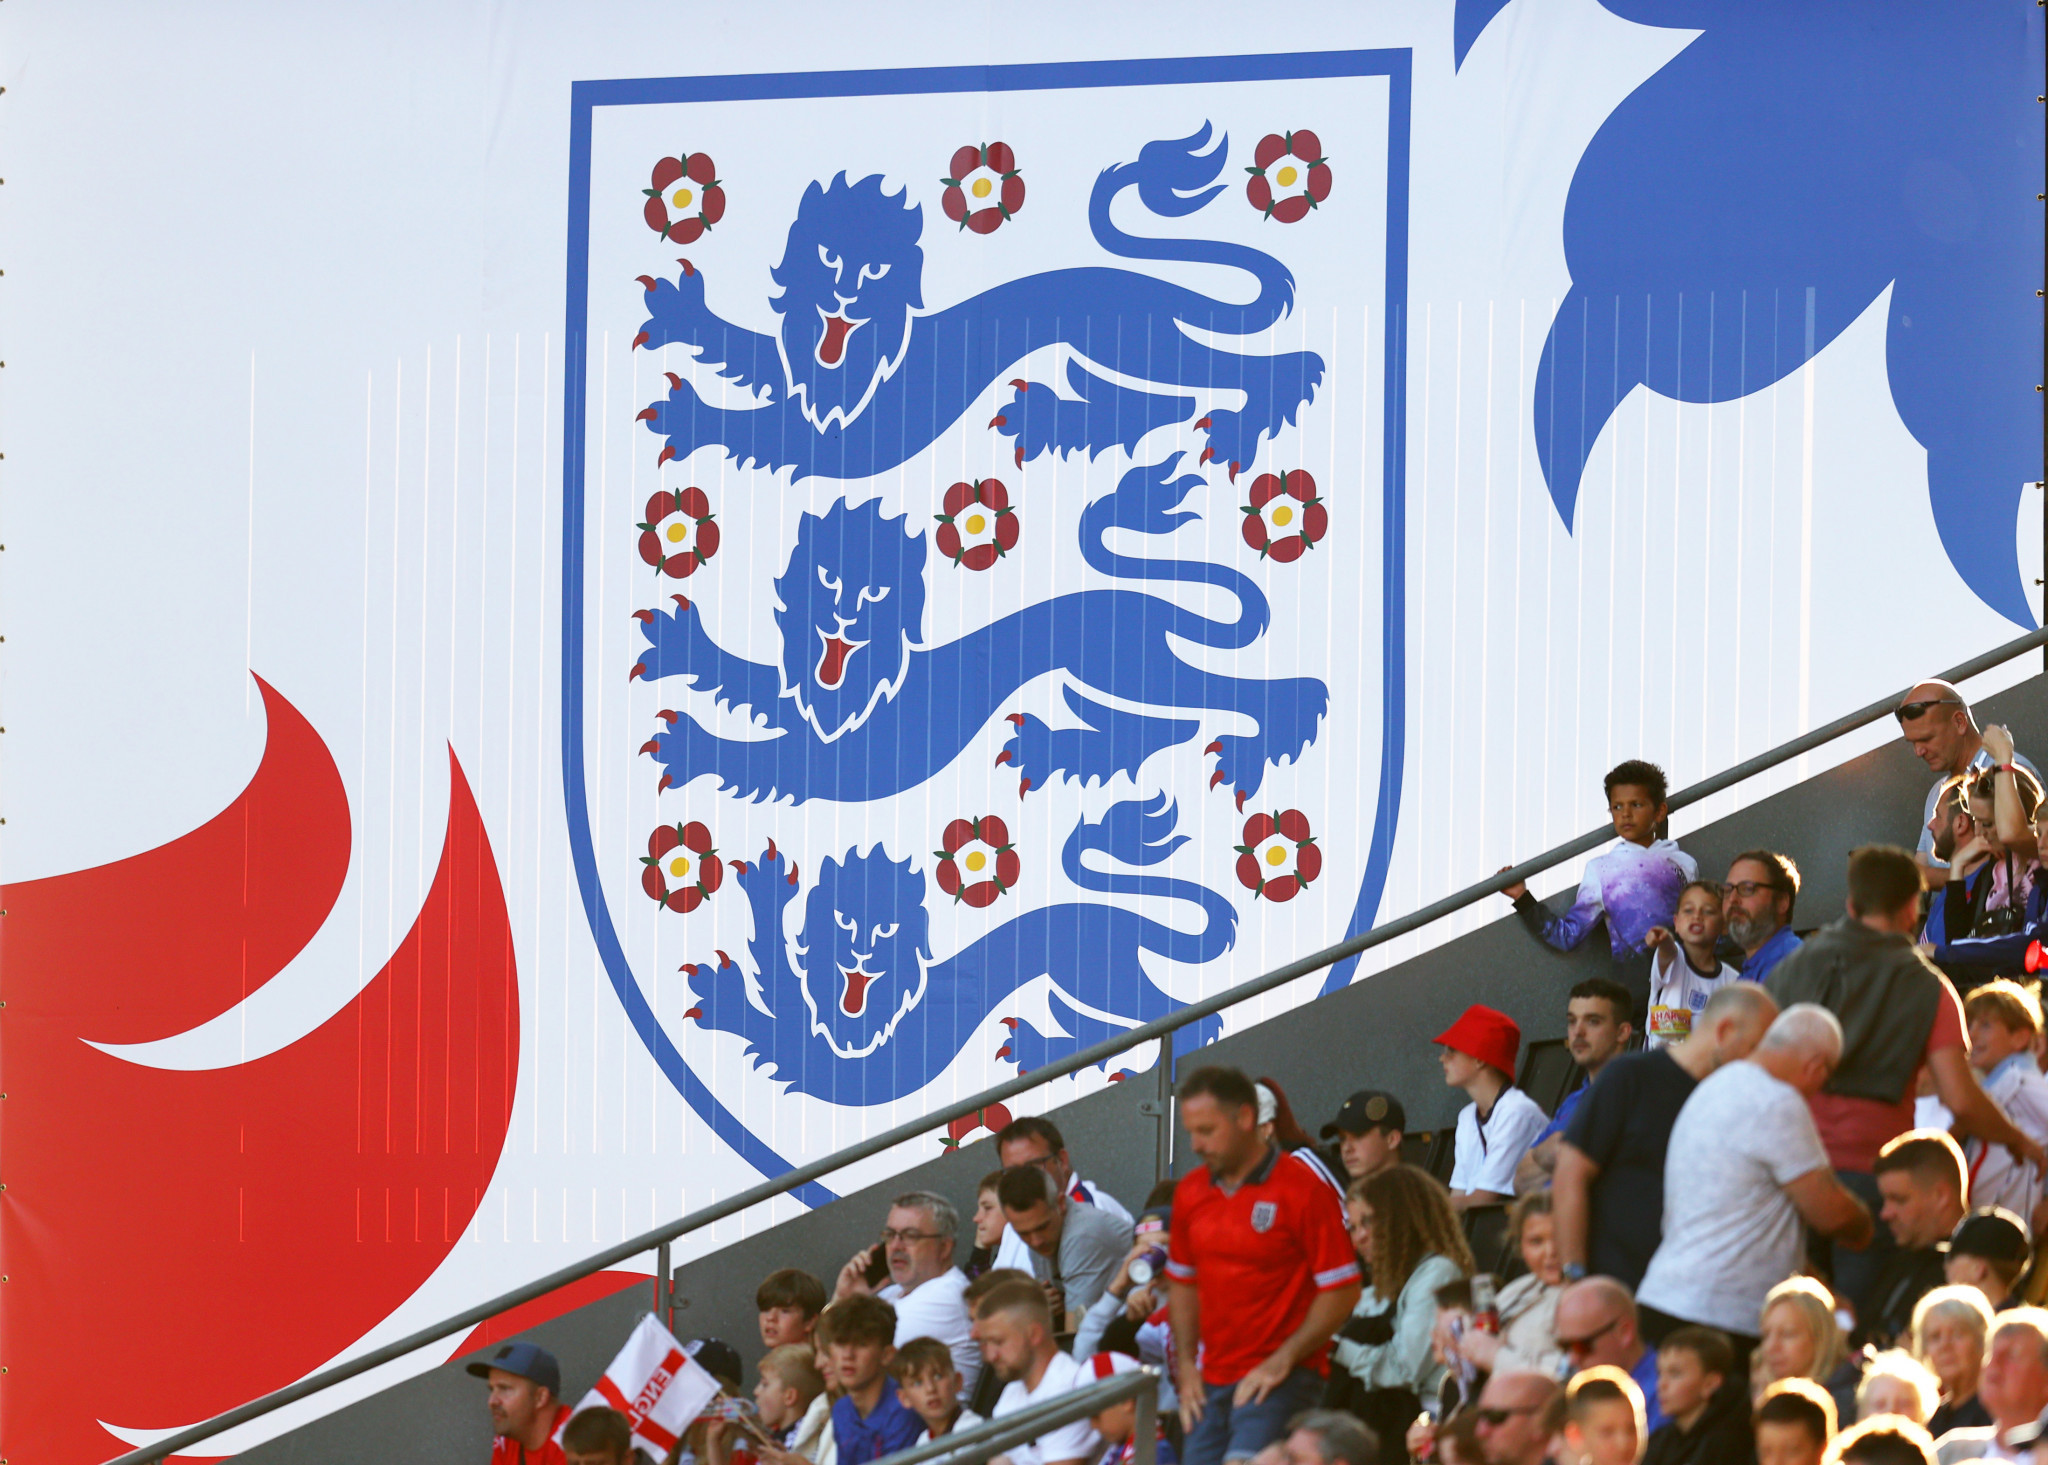 London 2012 media lead takes new role at England’s Football Association